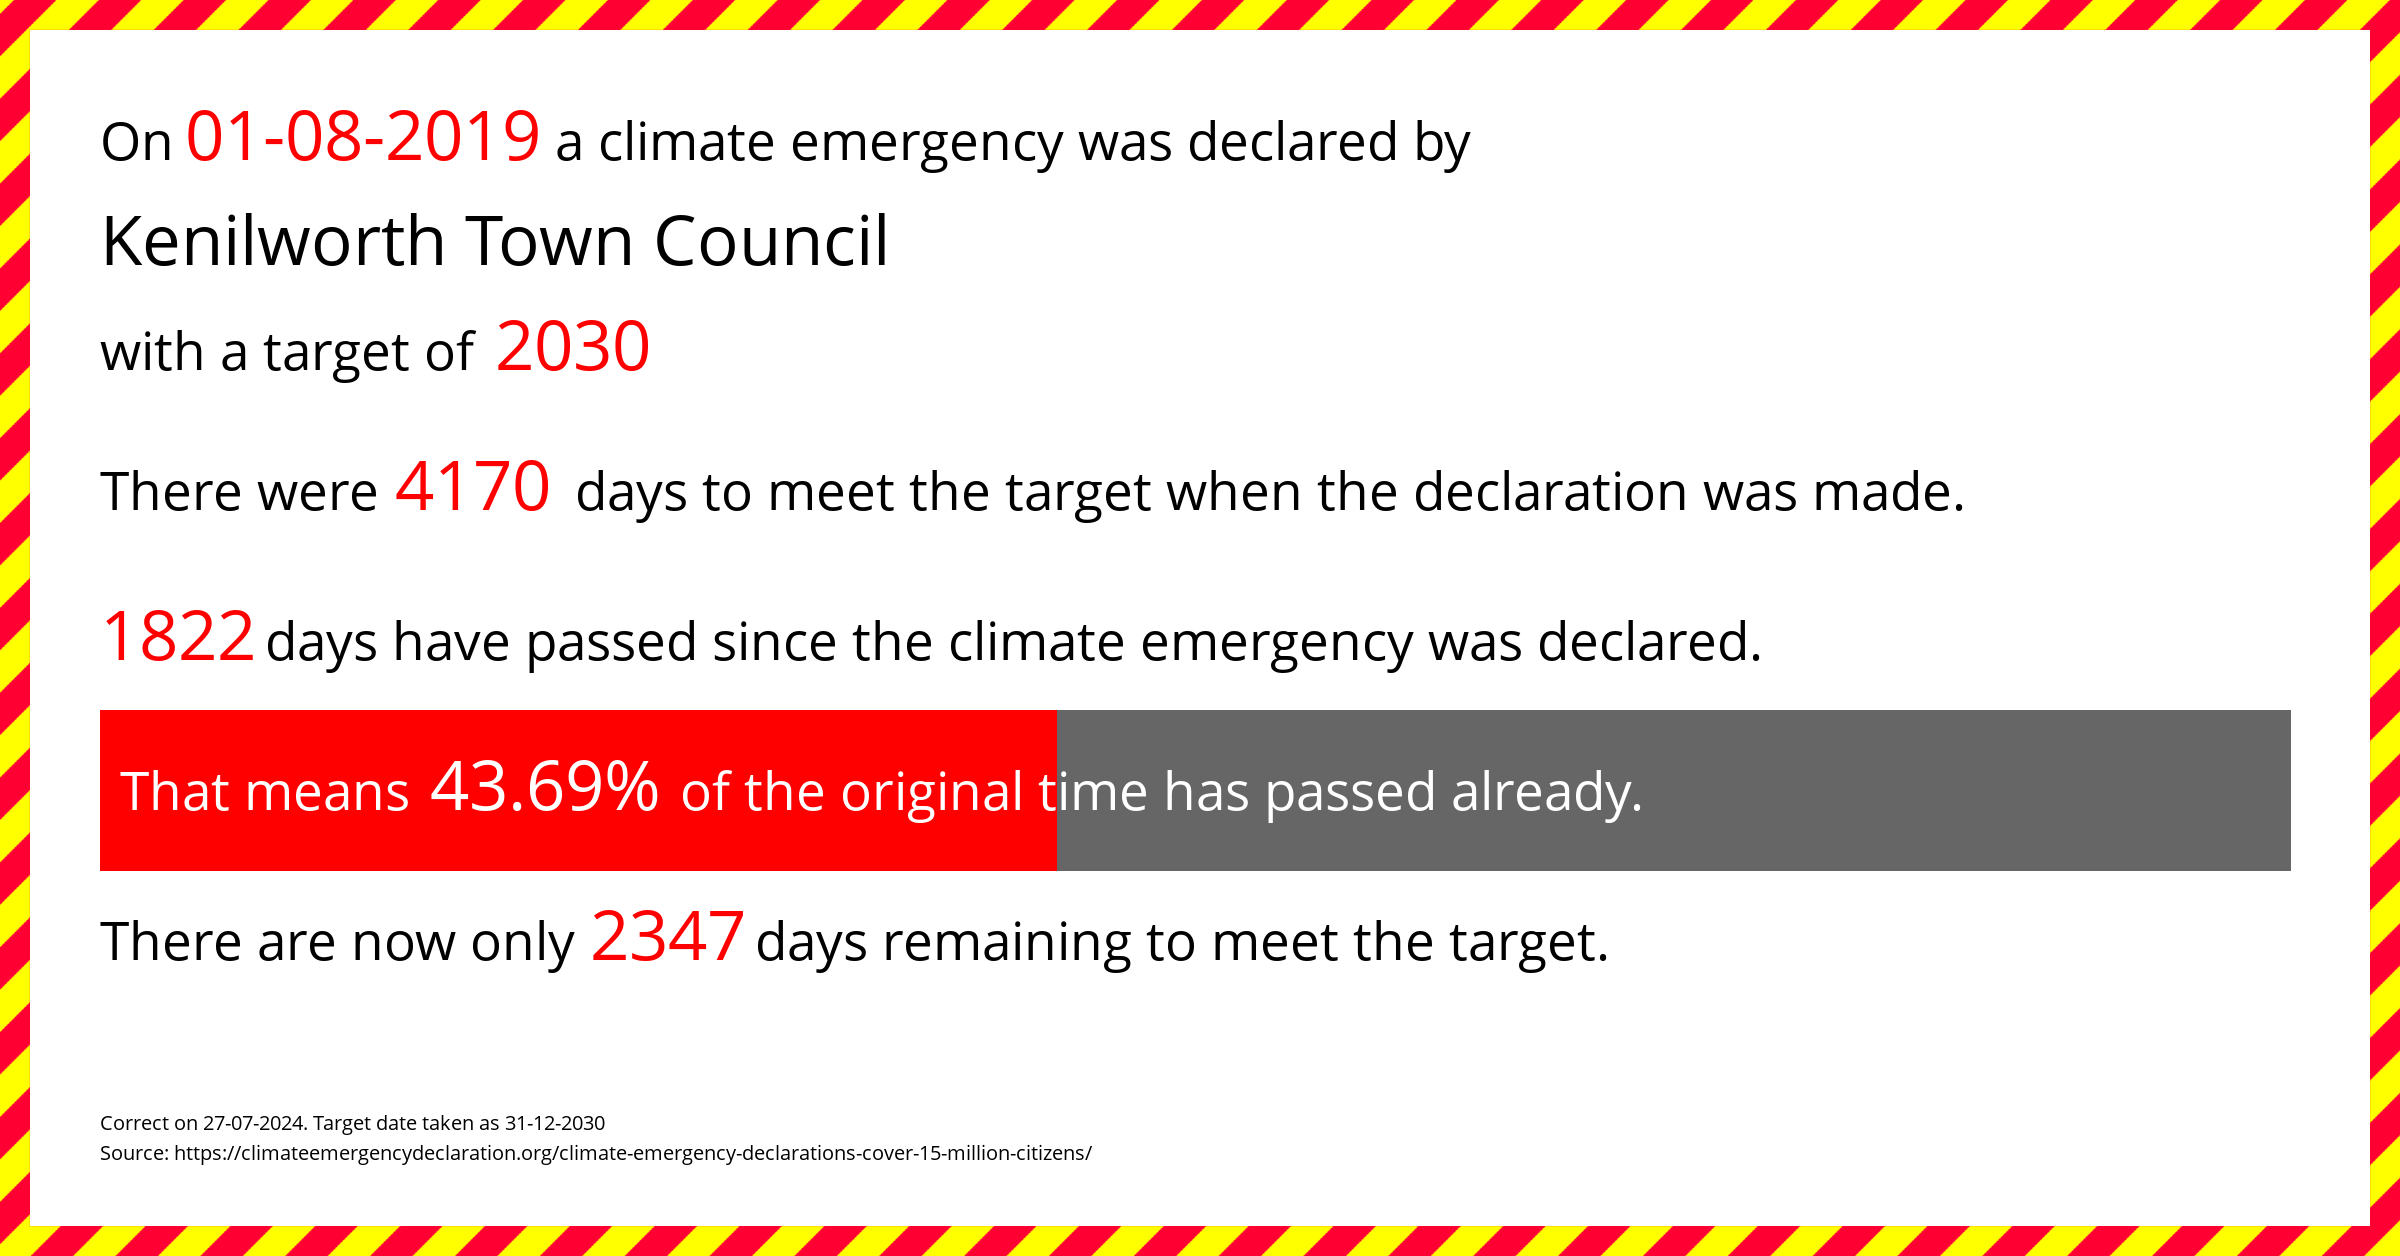 Kenilworth Town Council declared a Climate emergency on Thursday 1st August 2019, with a target of 2030.